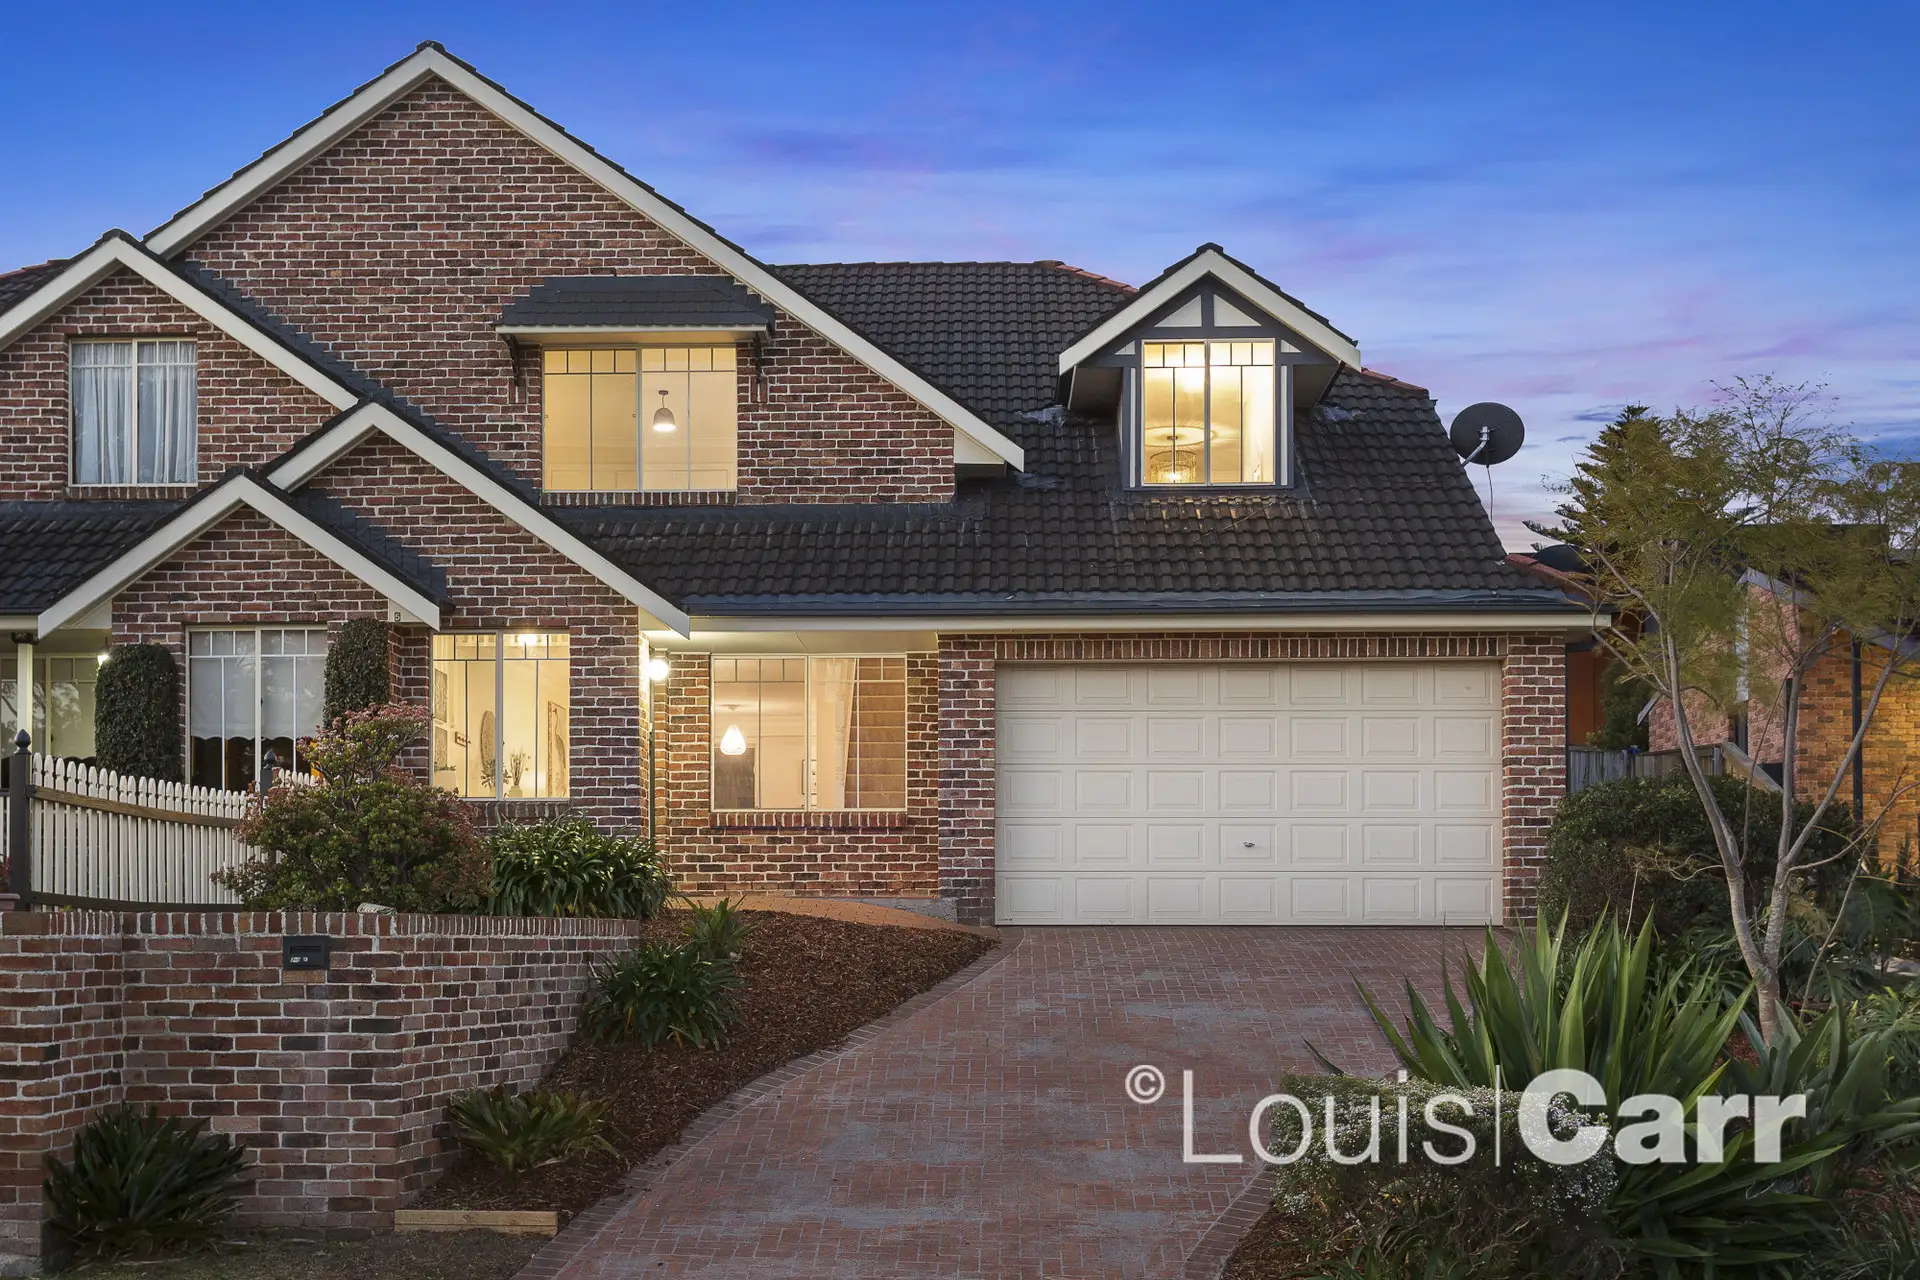 Photo #1: 2/5 Merelynne Avenue, West Pennant Hills - Sold by Louis Carr Real Estate